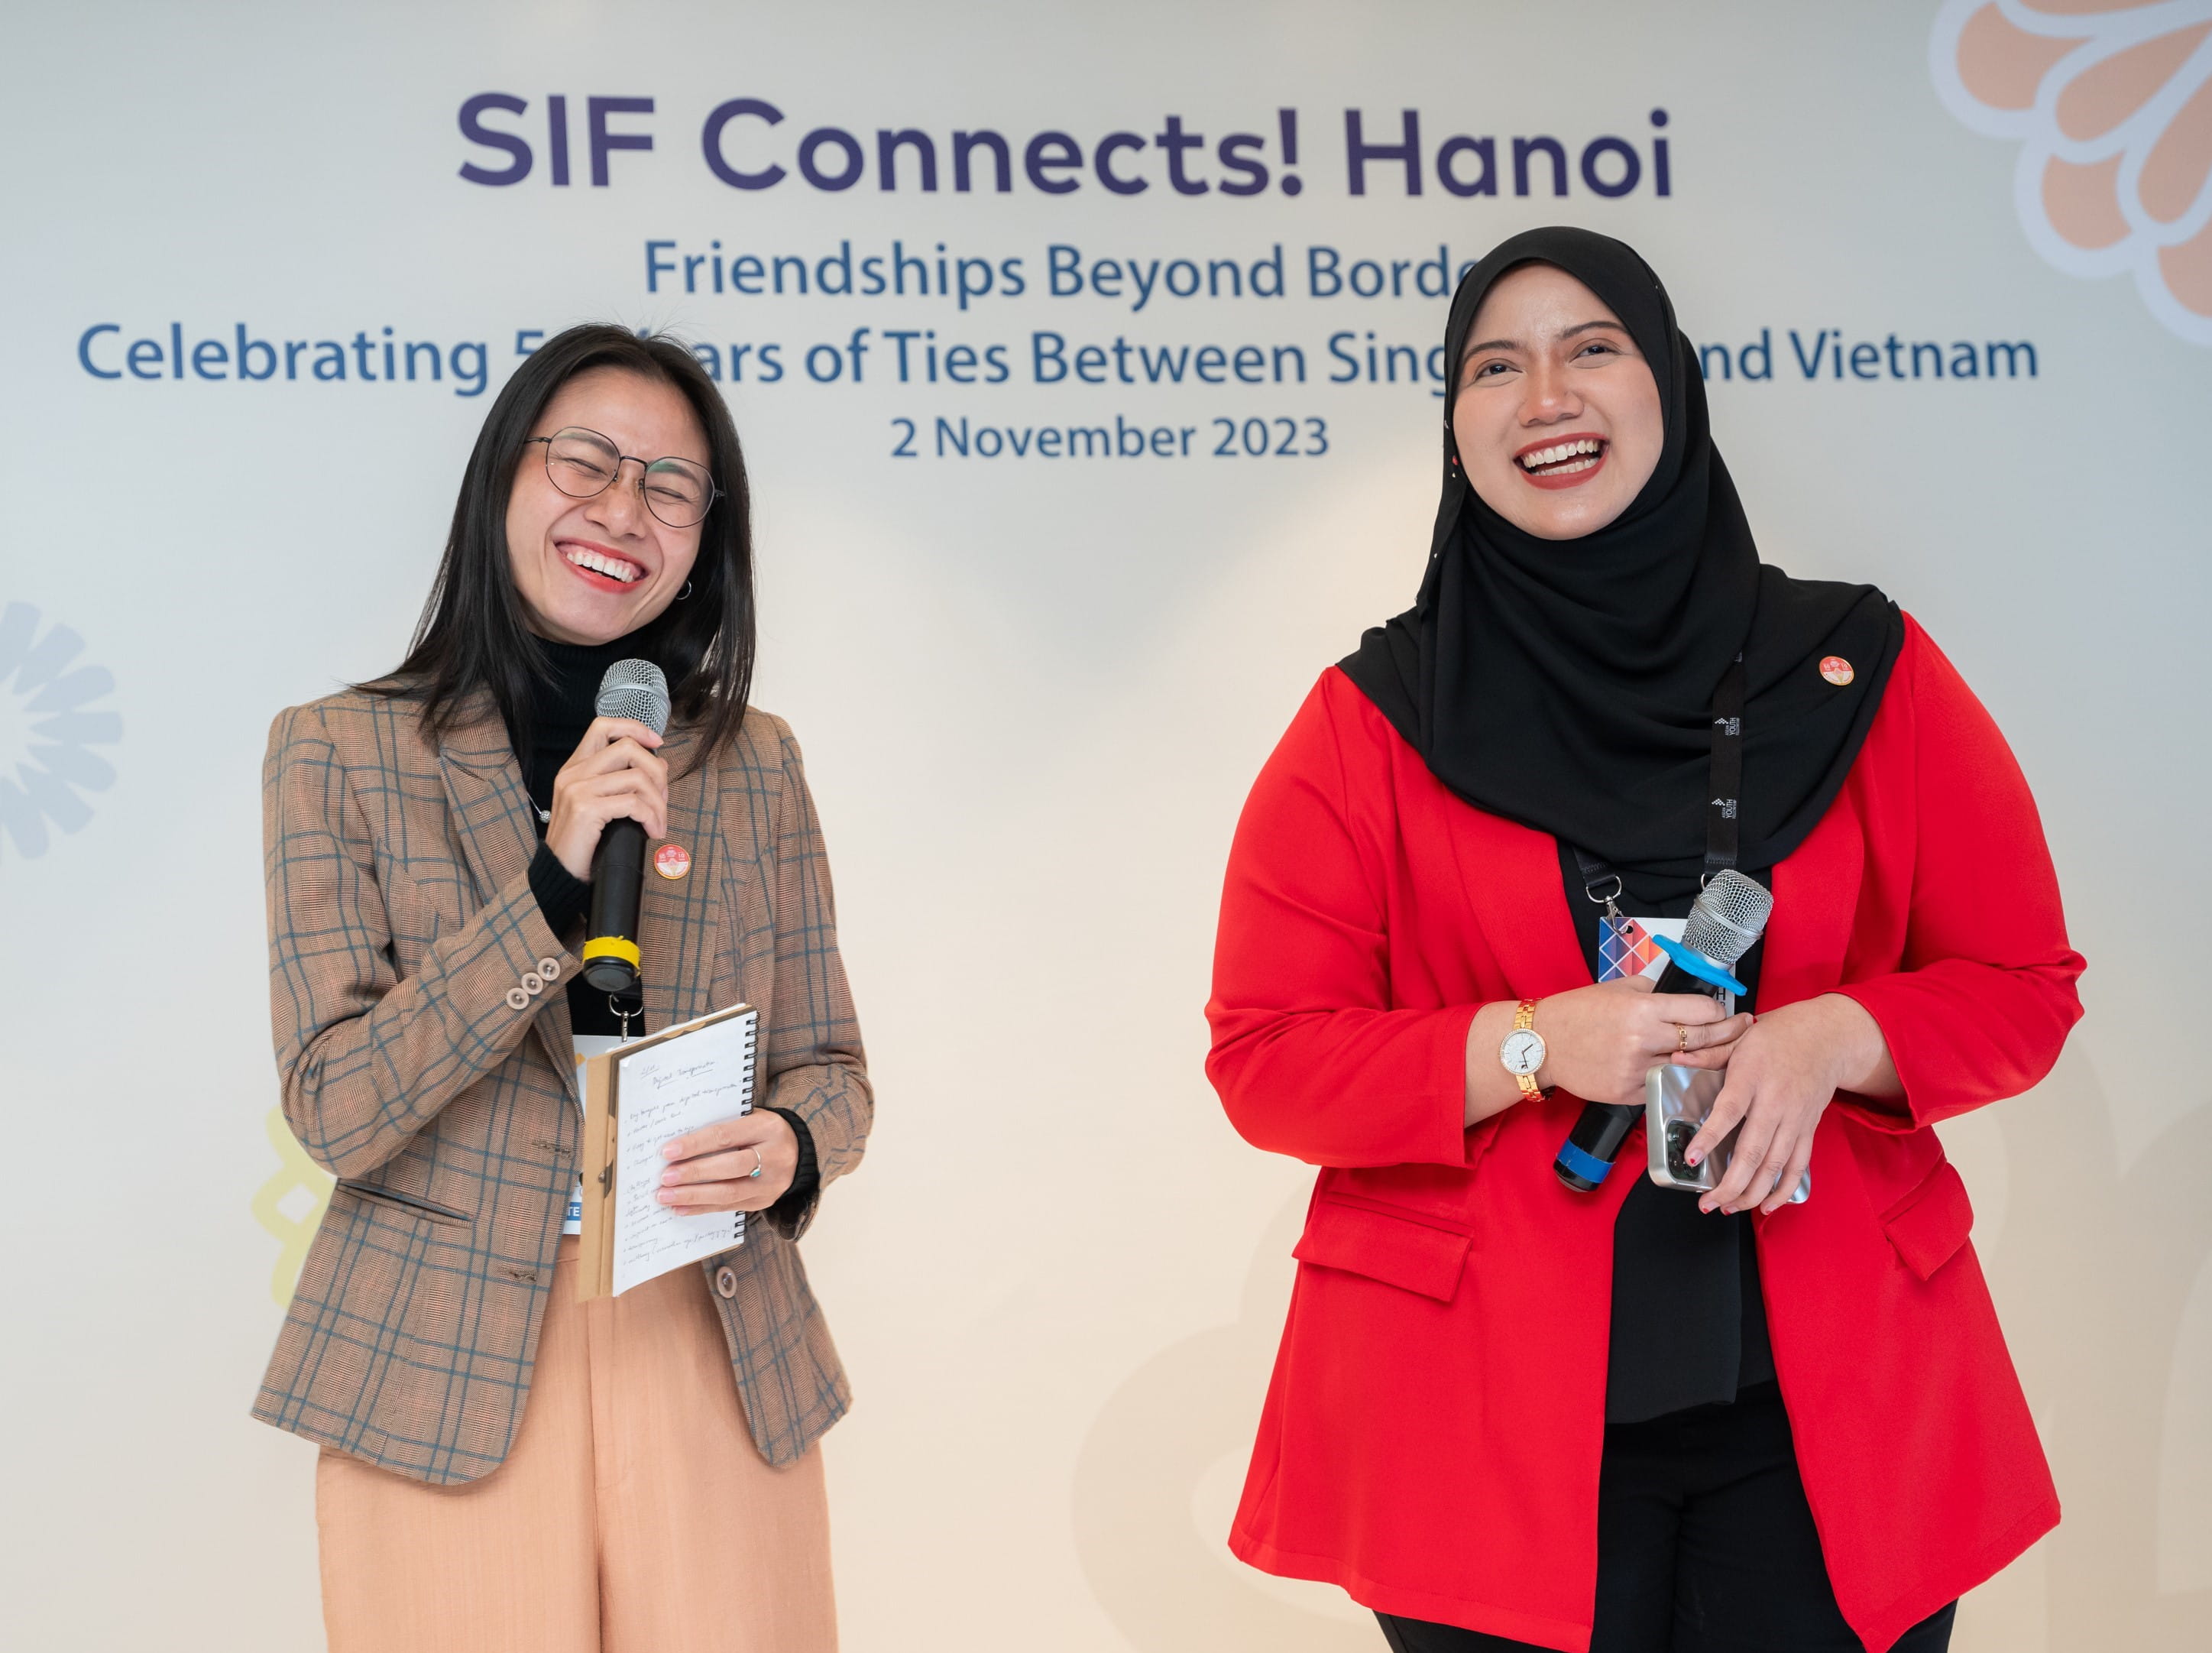 2 ASEAN Youth Fellows Ms Nguyen Thi Huyen from Vietnam and Ms Amalina Abdul Nasir from Singapore shared their experiences on the programme